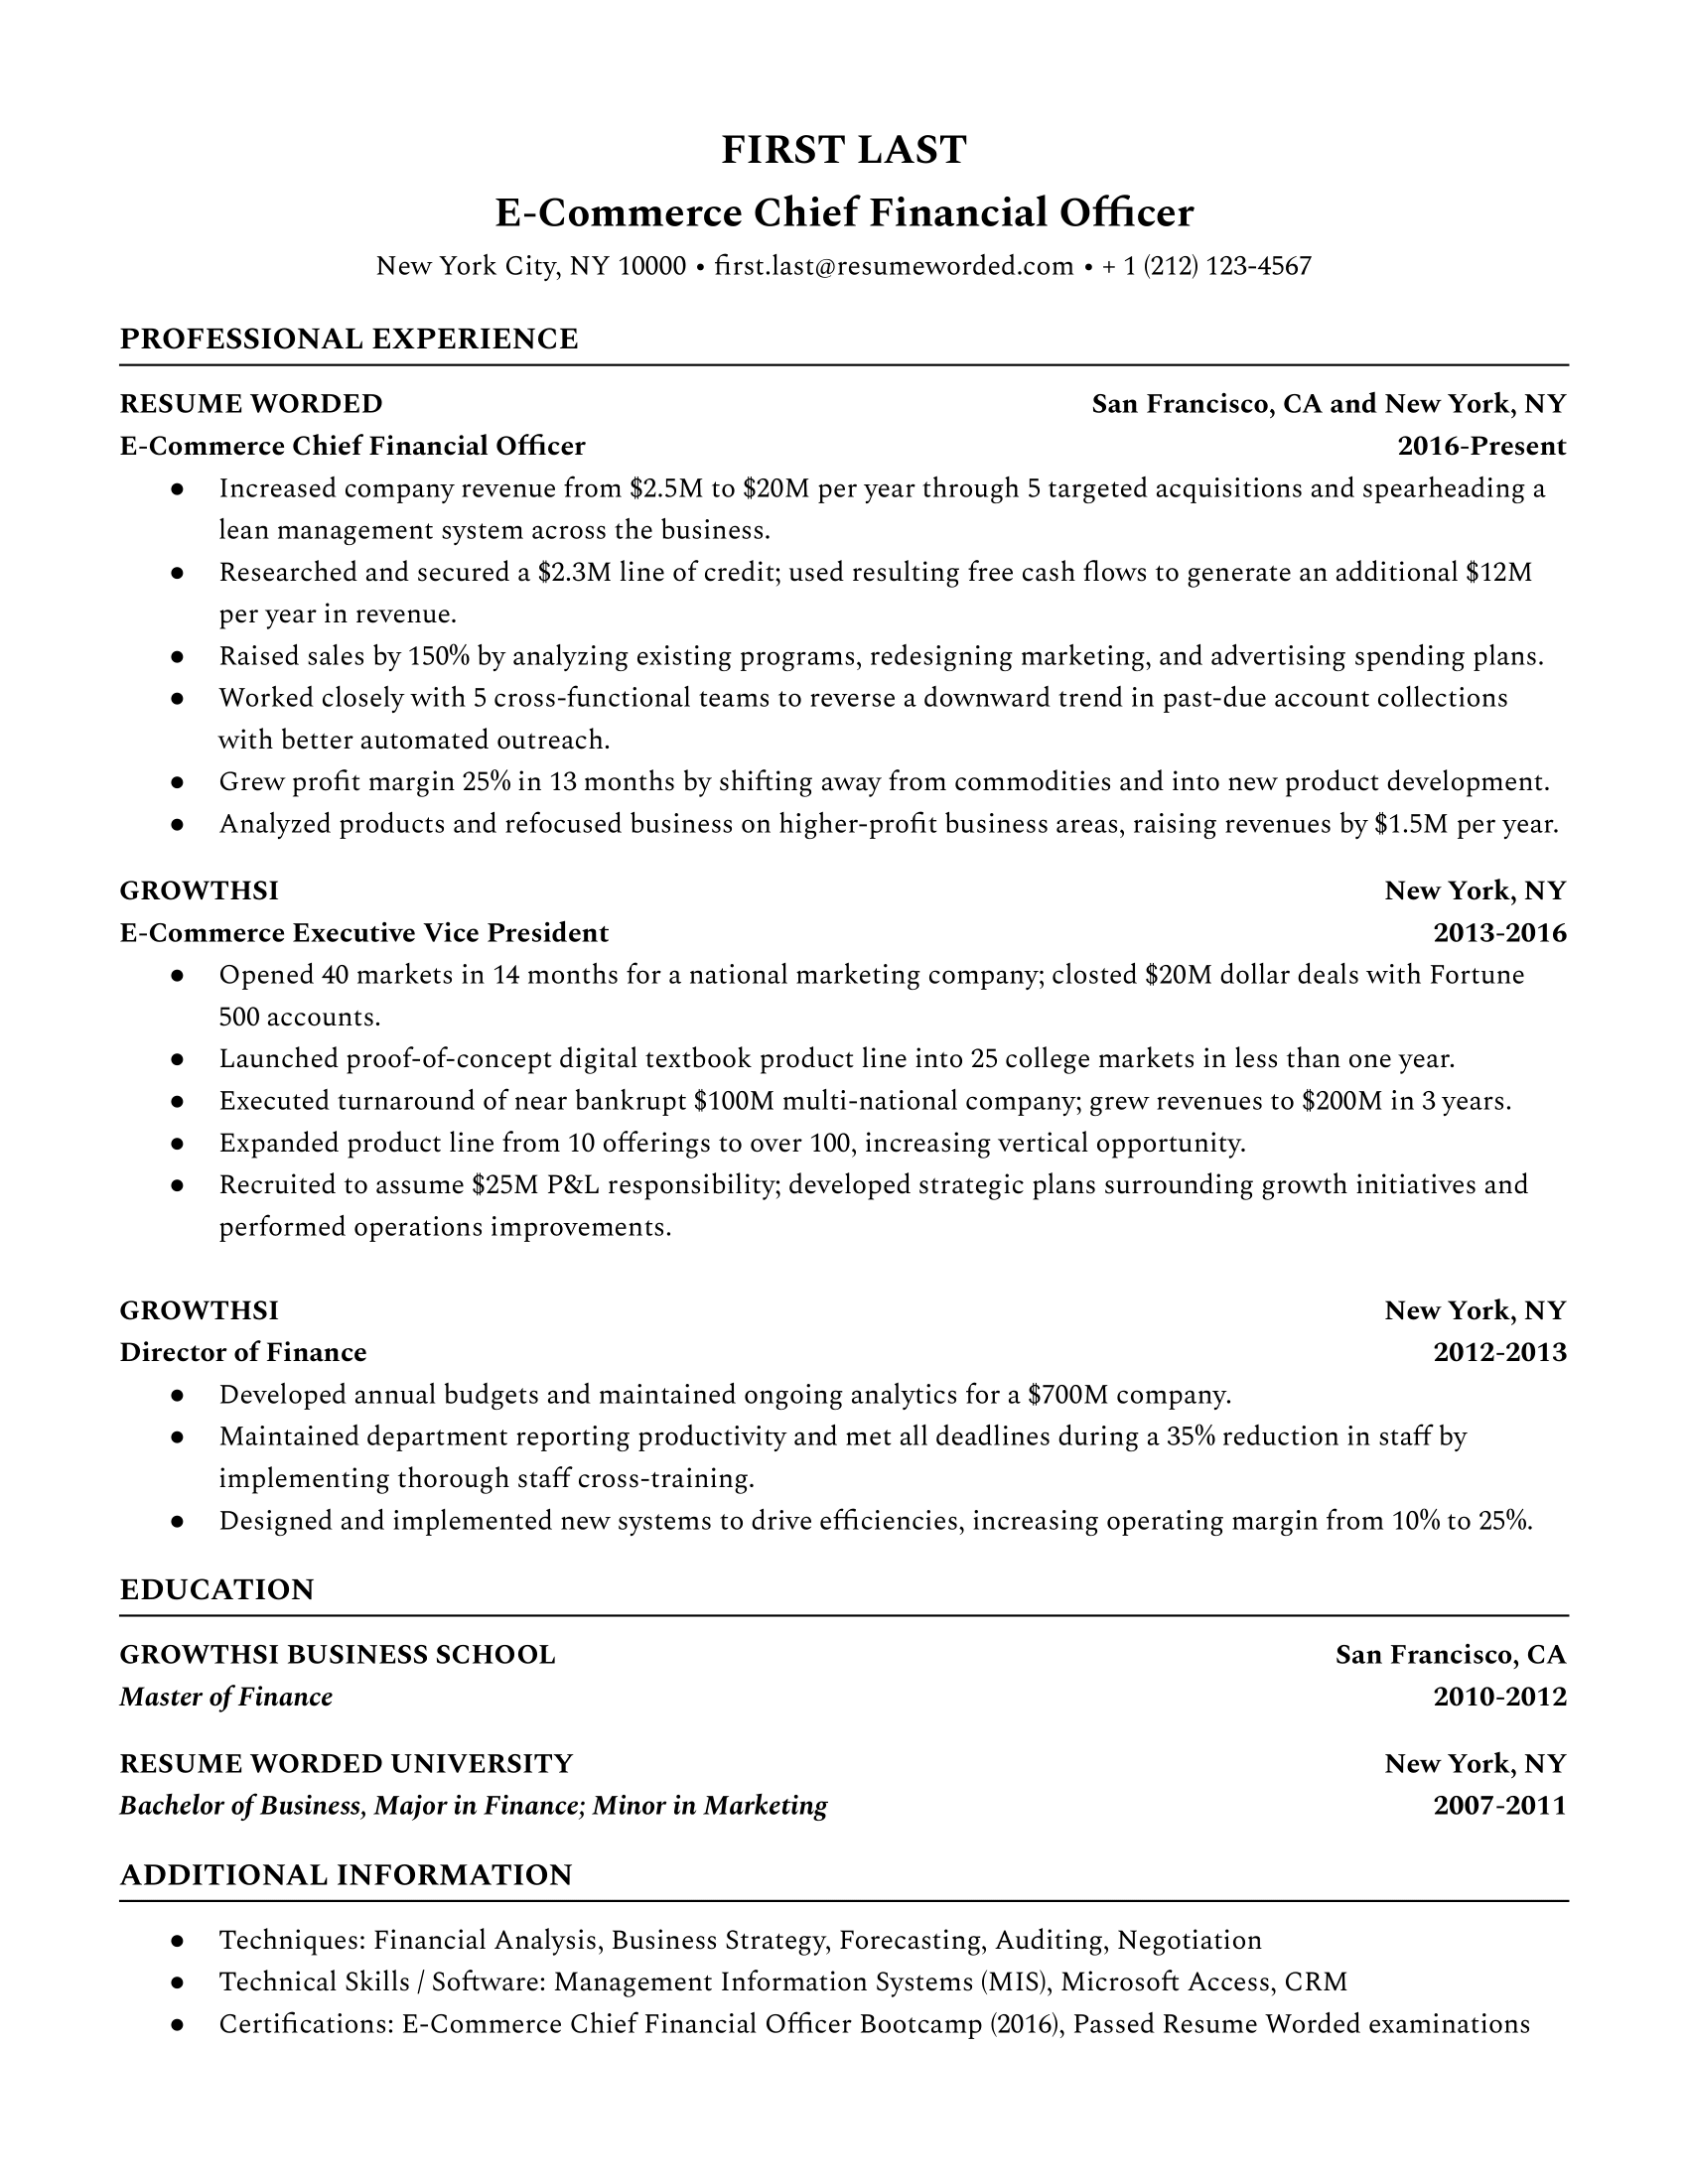 E-Commerce Chief Financial Officer Resume Sample